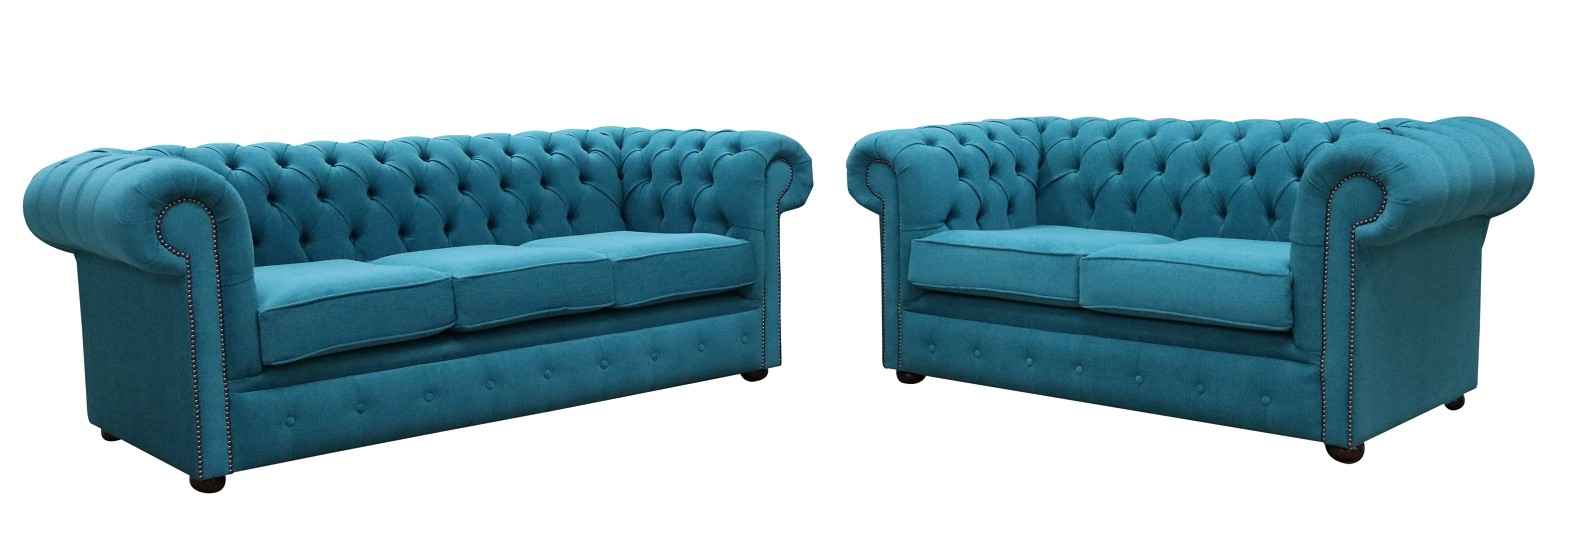 Relax in Style The Comfort of Chesterfield Sofas  %Post Title